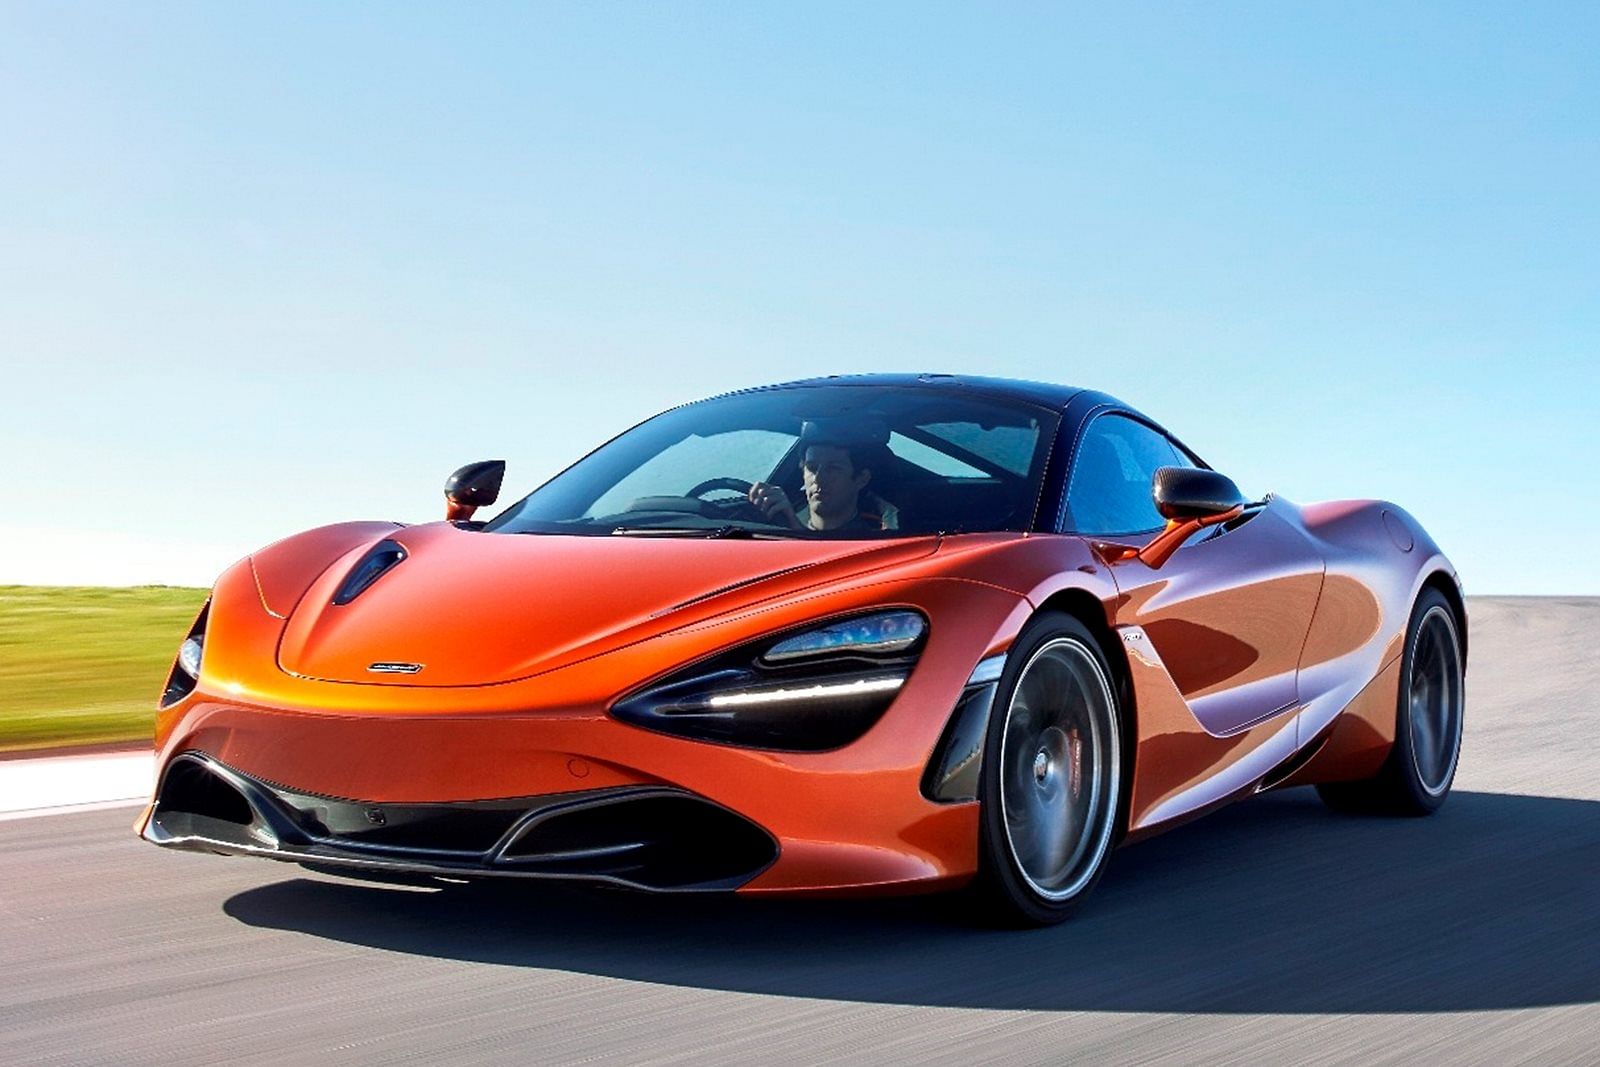 2022 Mclaren 720s Price, Review, Pictures and Specs | CARHP